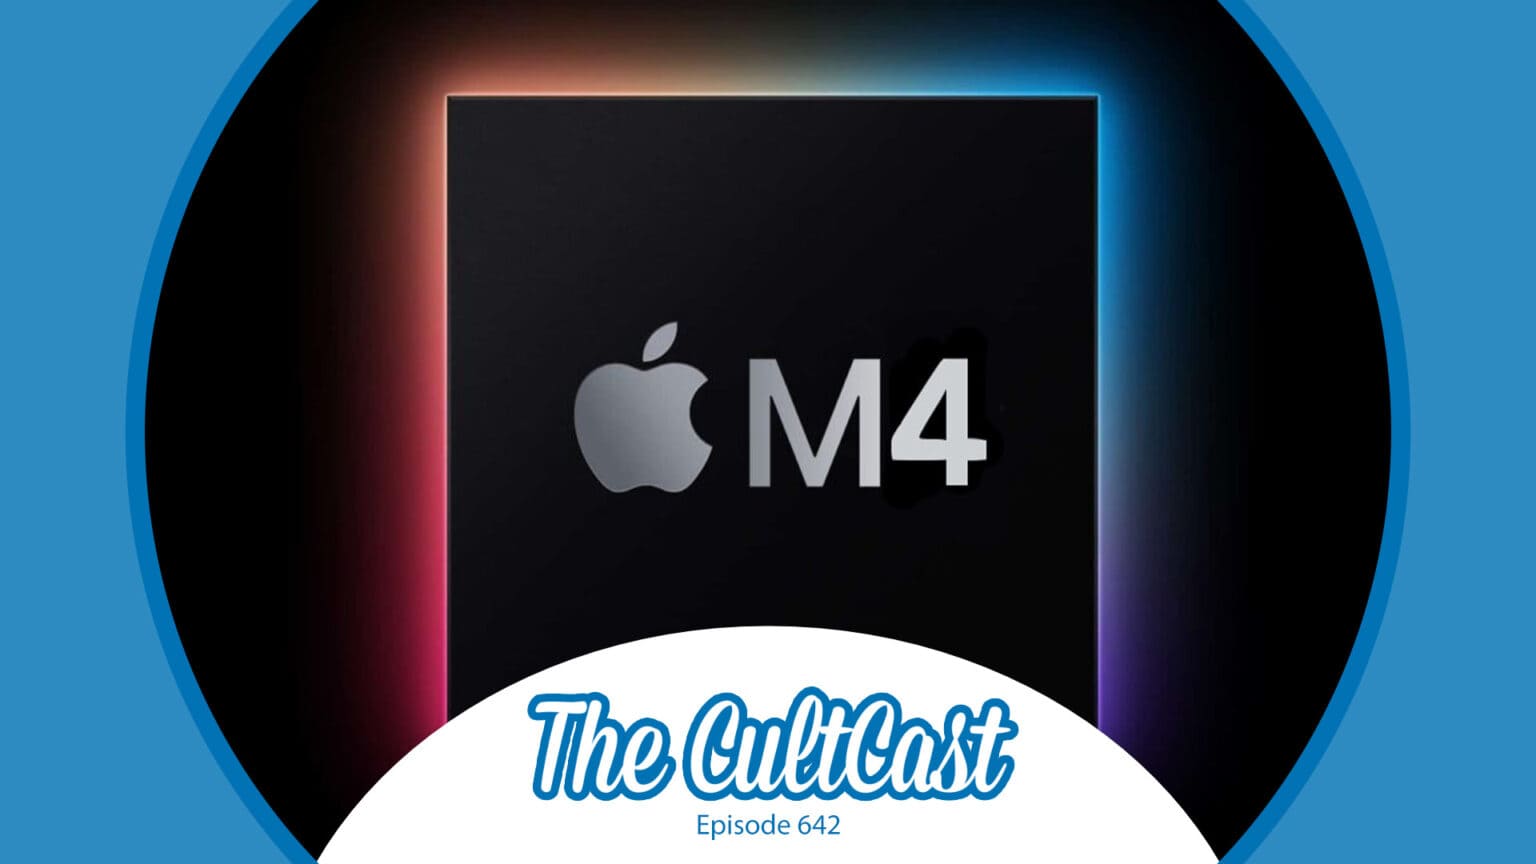 Apple M4 chips will power AI-focused Macs. The CultCast episode 642.